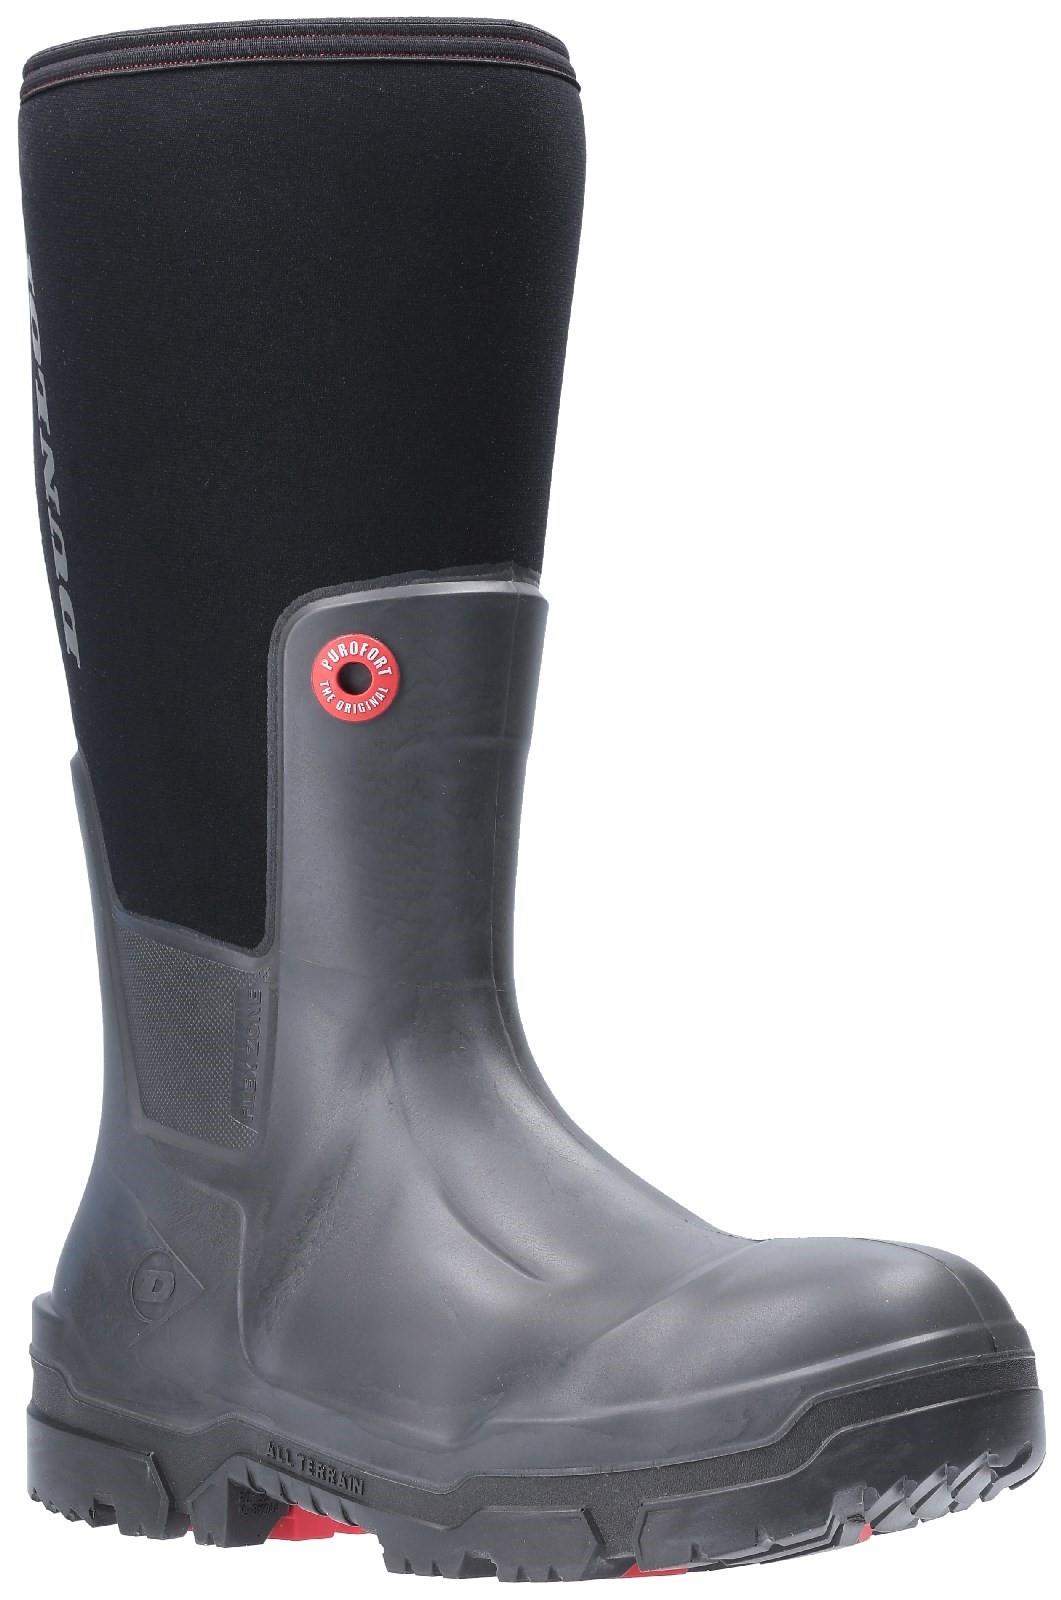 Dunlop Snugboot Pioneer OD60A93 black non-safety wellington boot